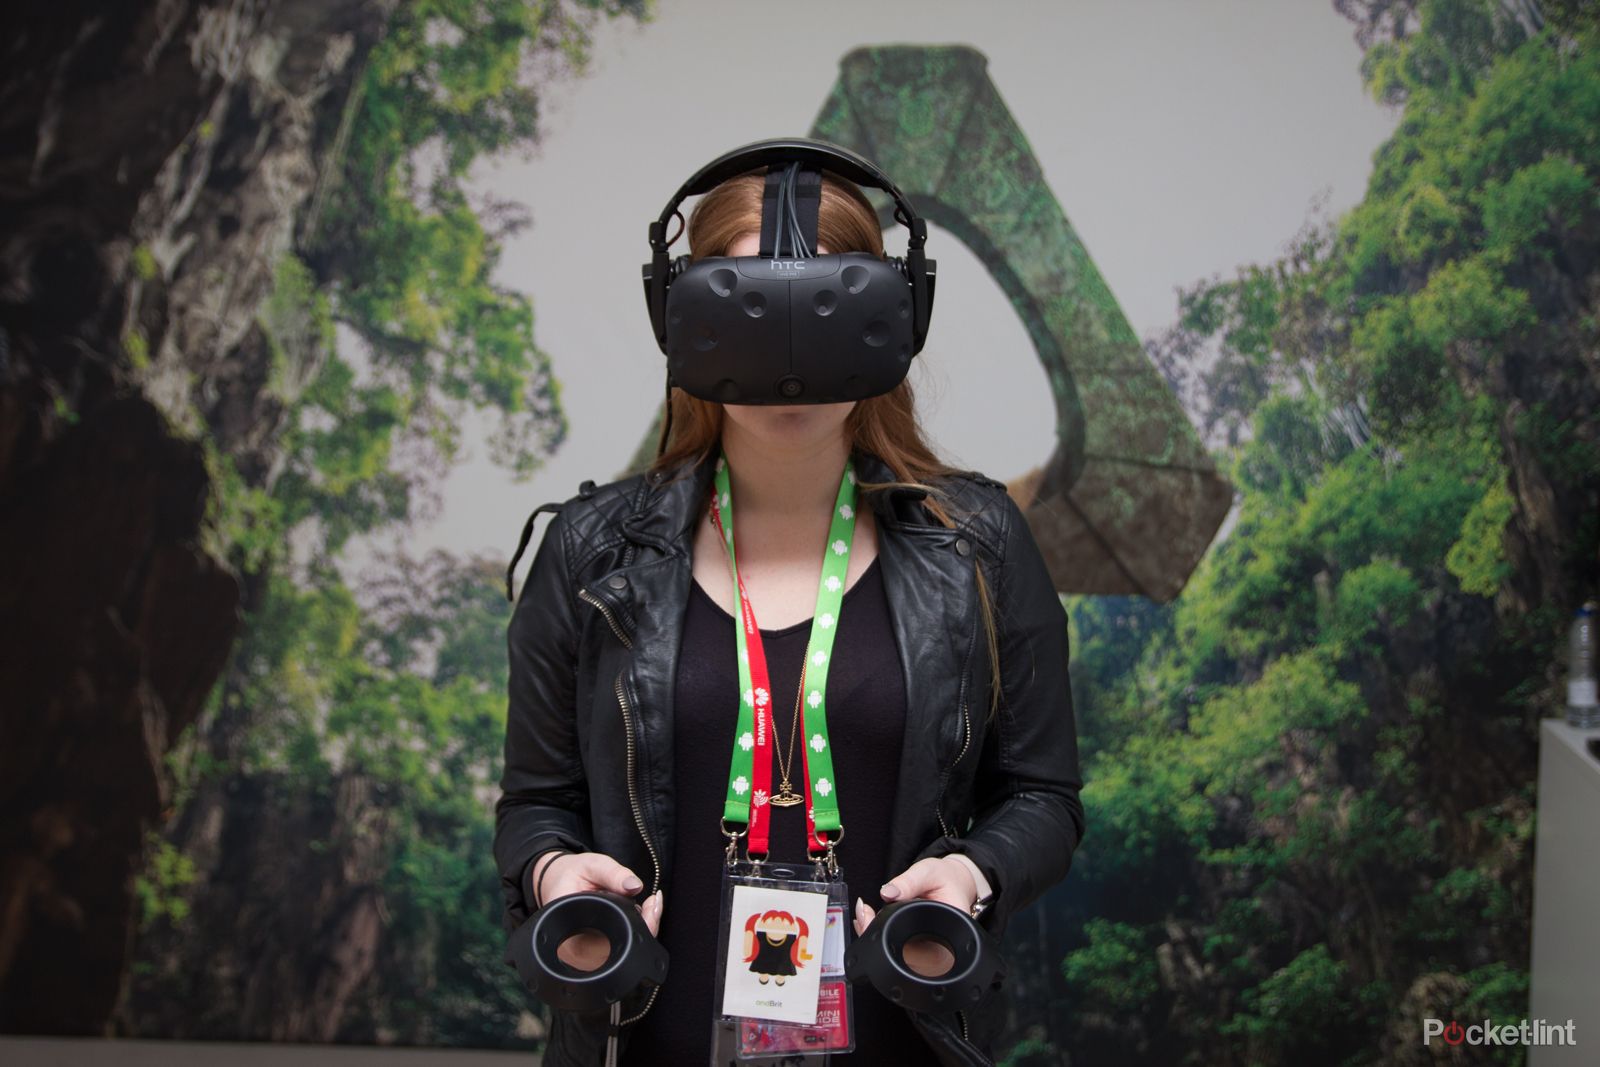 forget phones mobile world congress 2016 is all about vr image 2